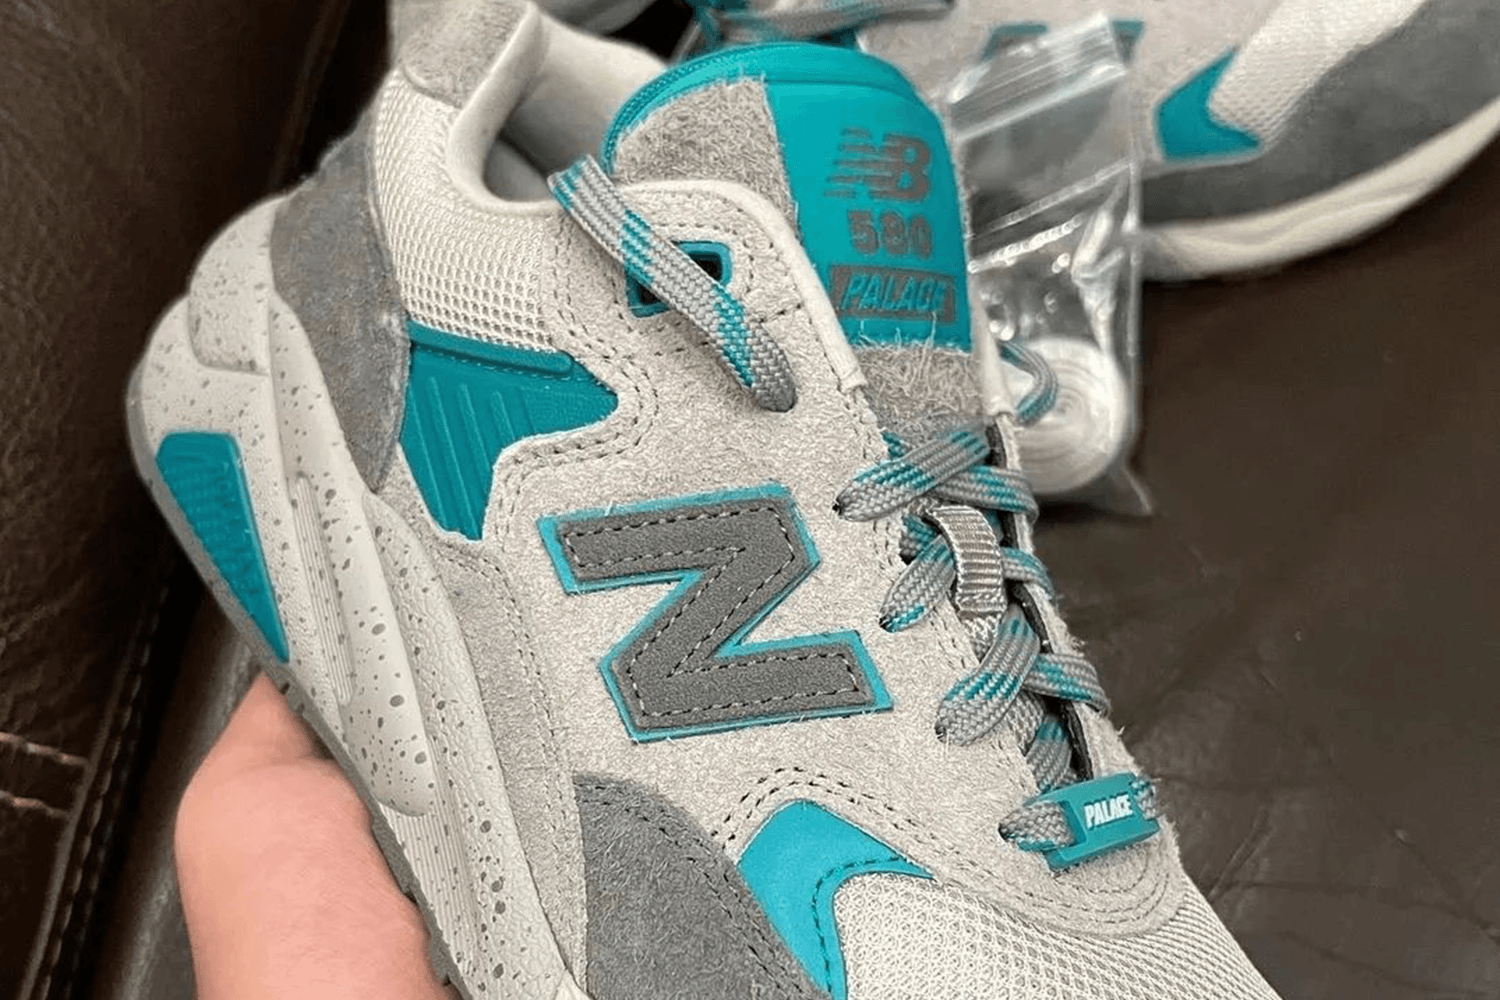 First Palace and New Balance flag is on the way